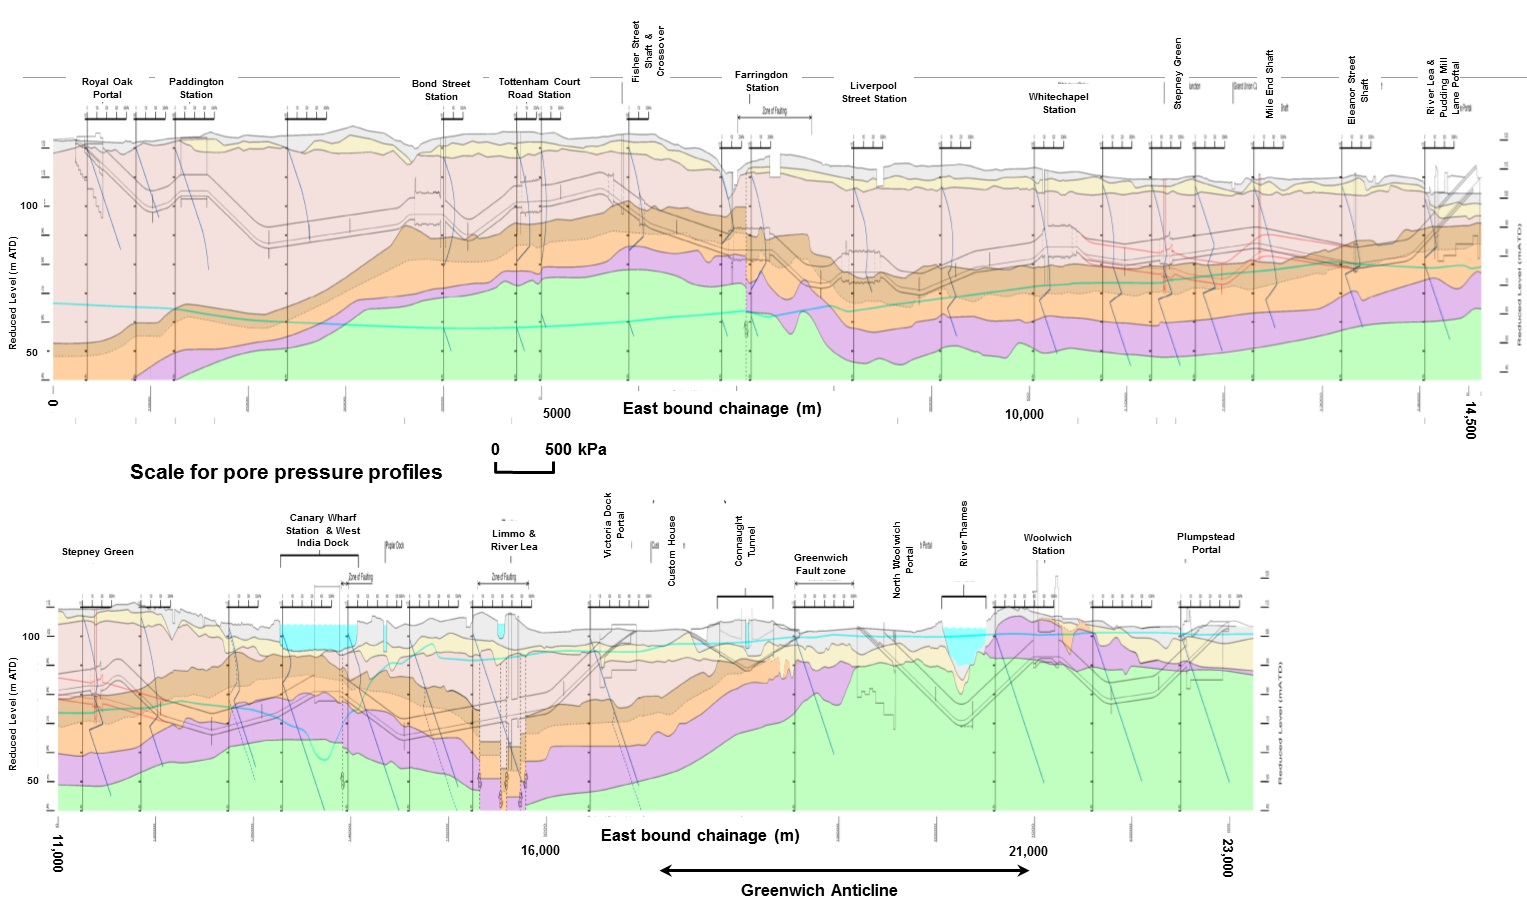 Figure 1 - Crossrail Tunnel Alignment and Geology